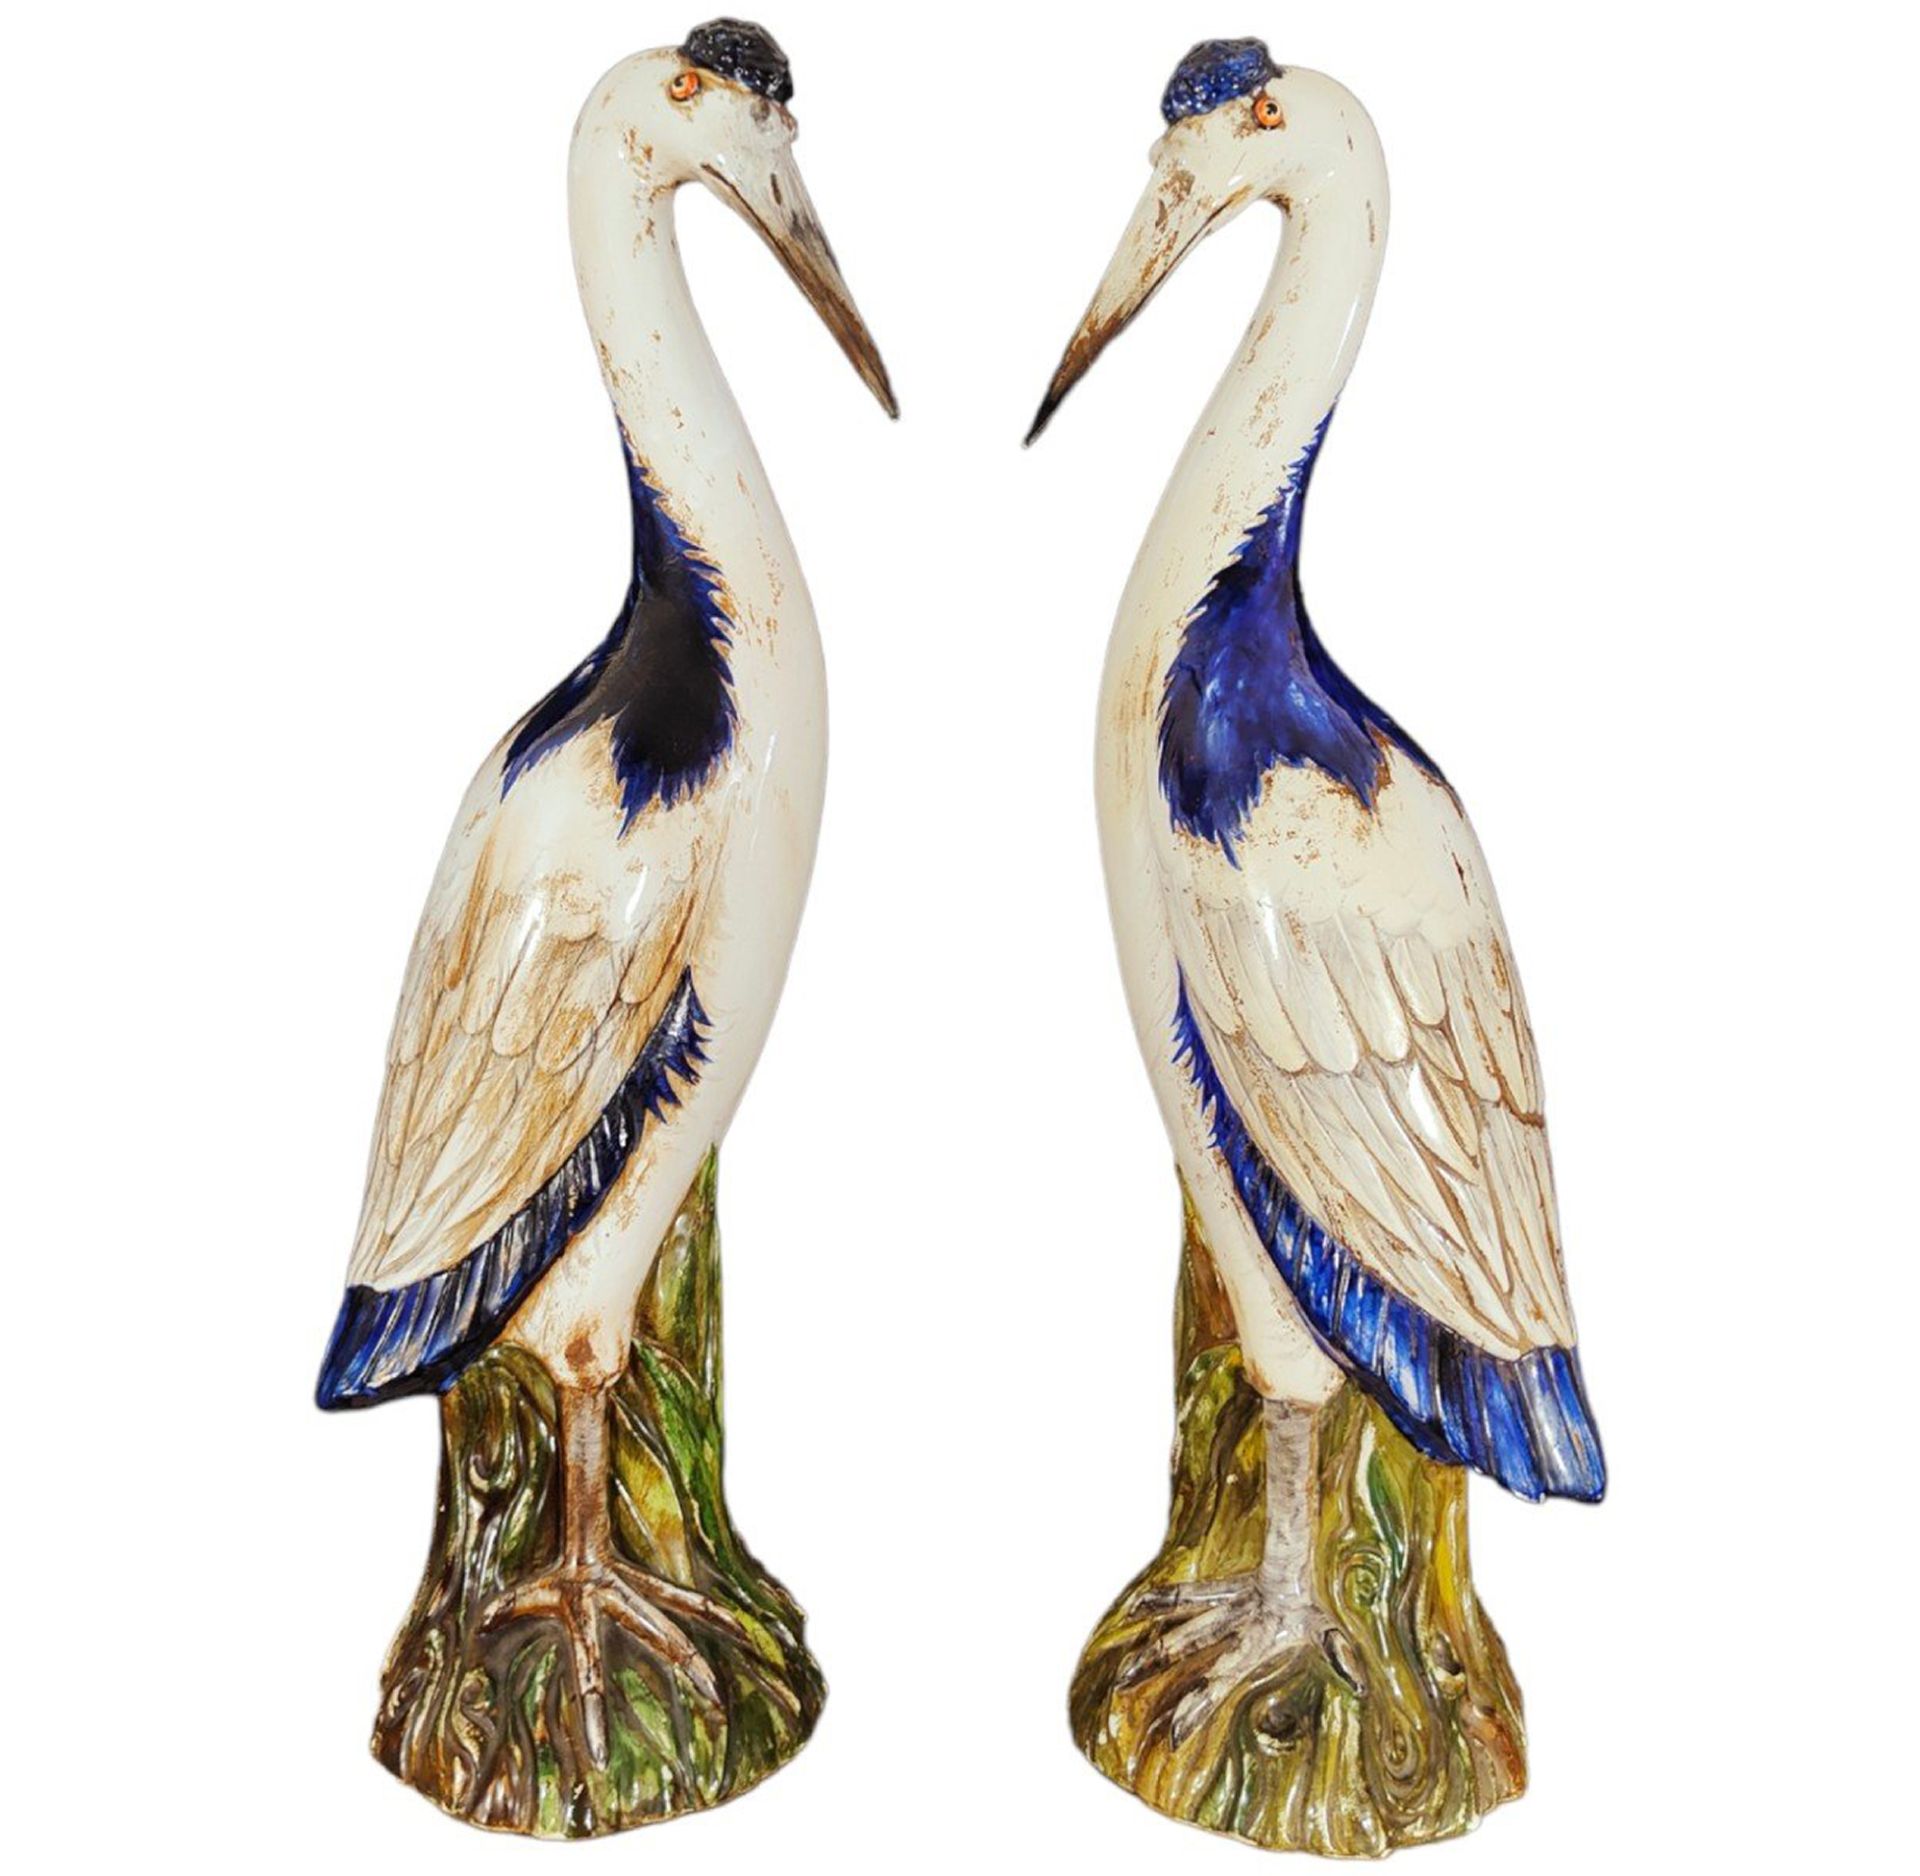 Pair of Herons in Ceramic from the 50s